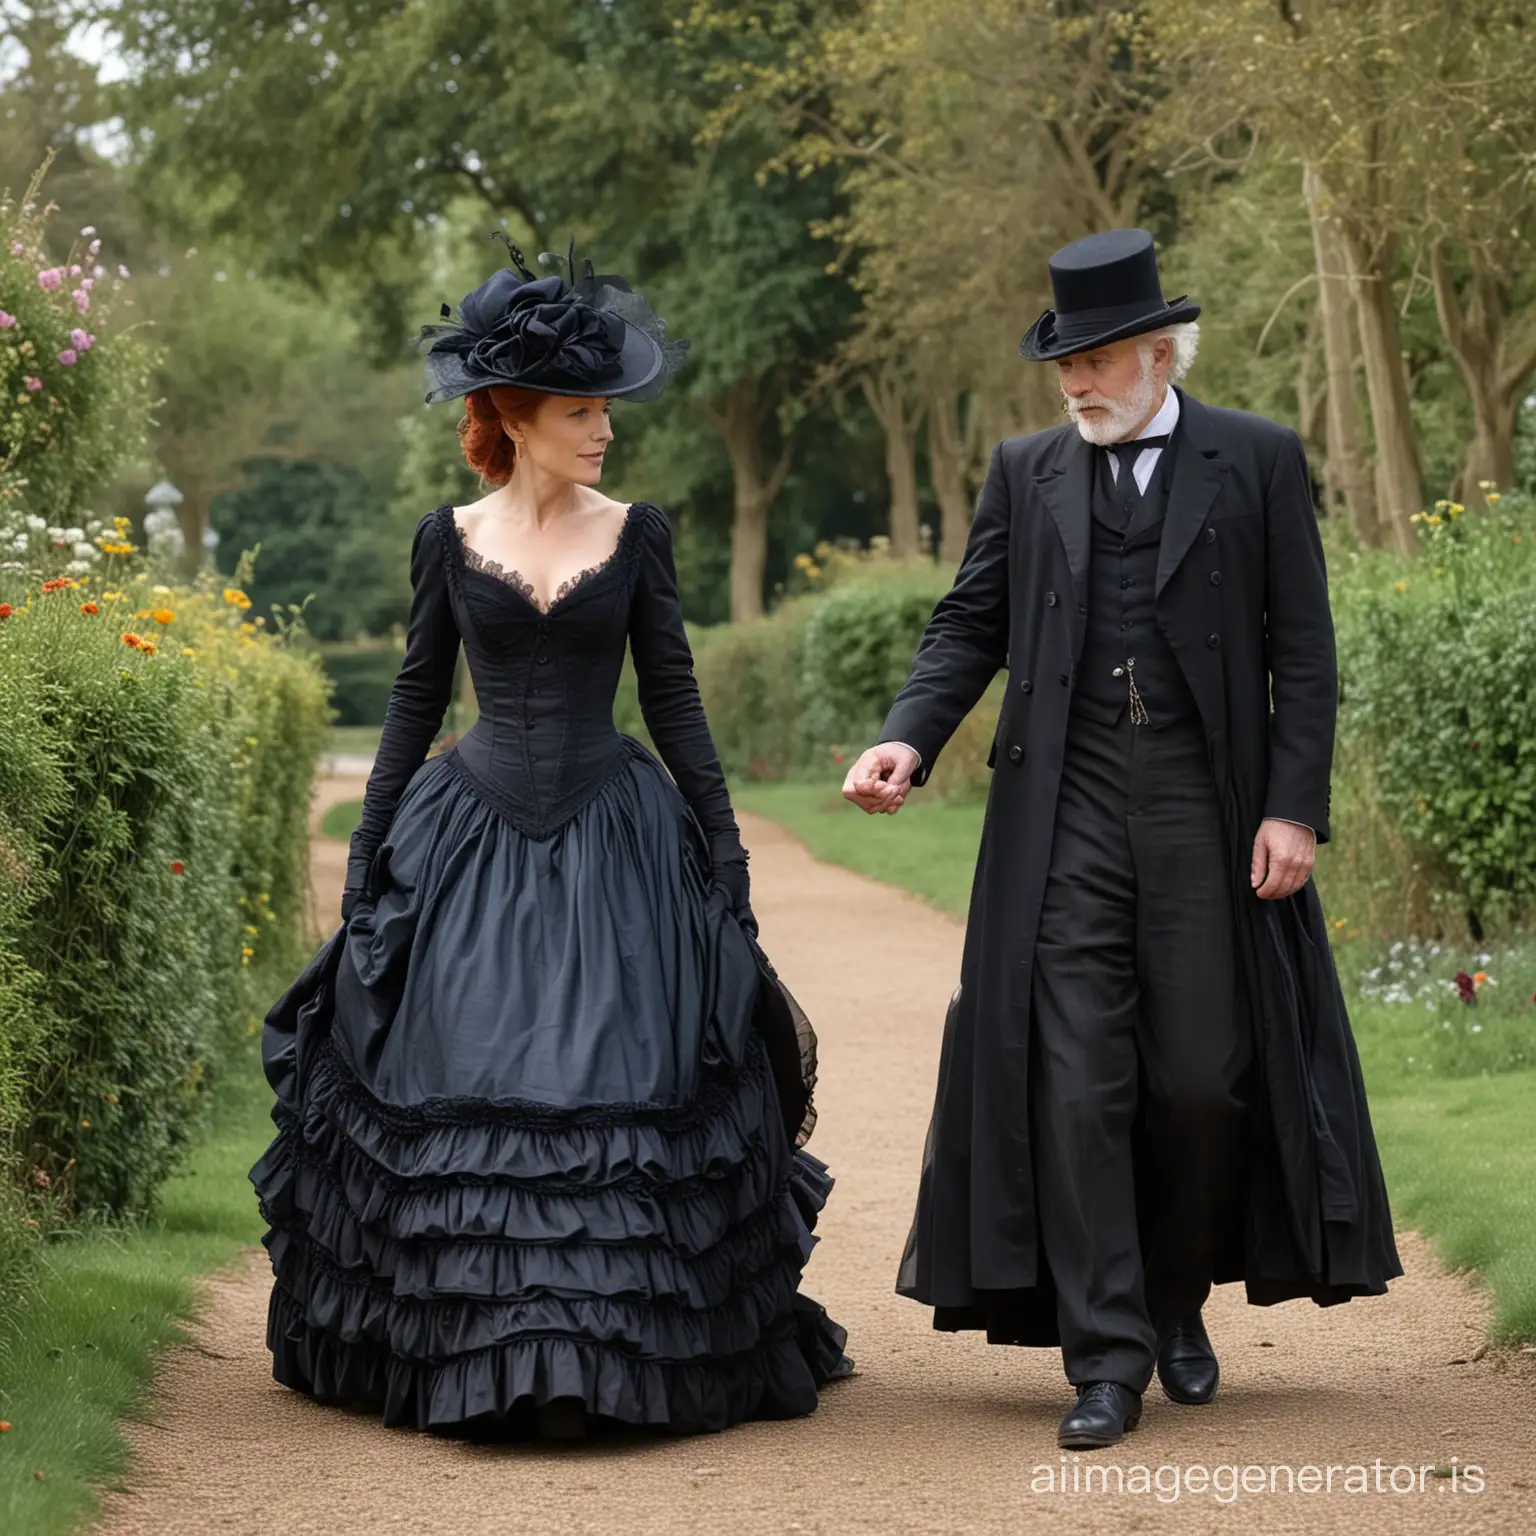 Victorian-Newlyweds-Elegant-RedHaired-Bride-and-Groom-Stroll